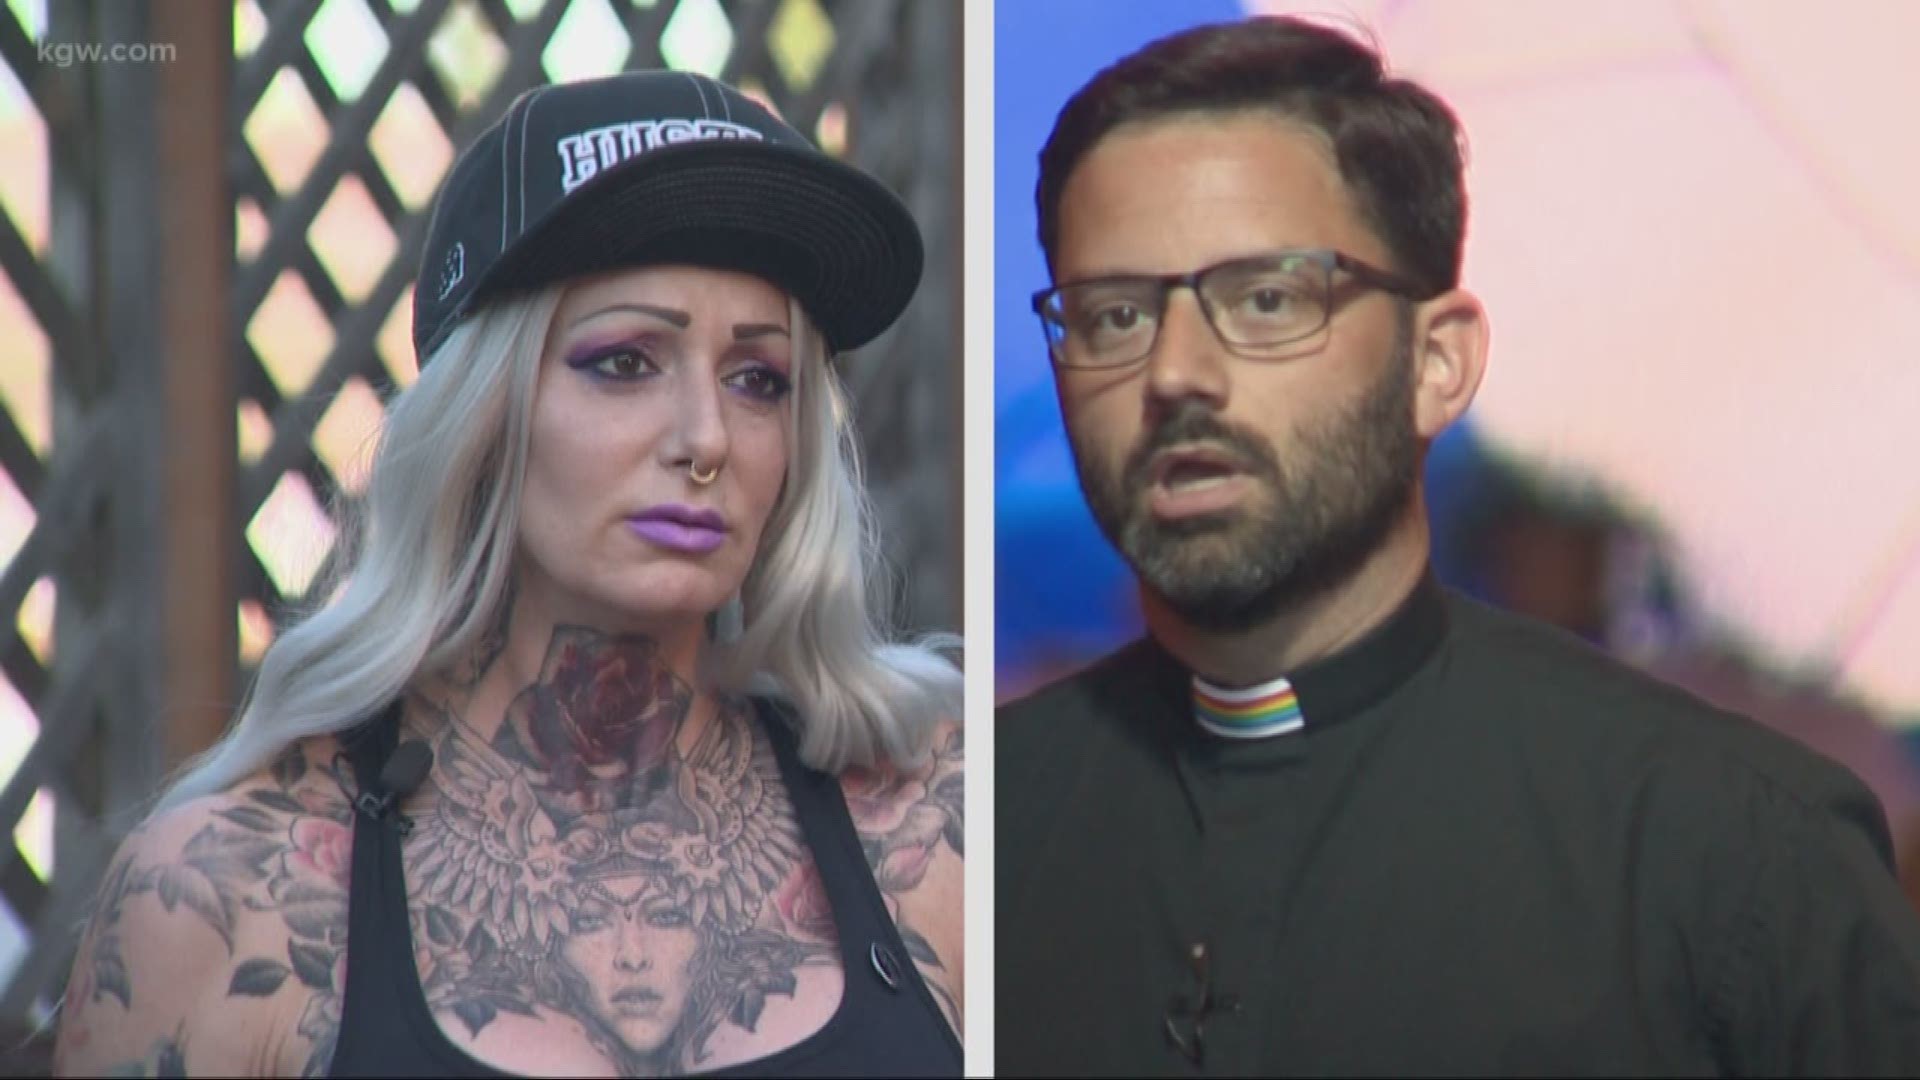 Pastor Adam Ericksen and Dawn “Blu” McCall swapped messages after an ICE raid in Mississippi. Now, they’re raising money to help children of undocumented immigrants.
Add to: Portland stripper, pastor strike unlikely friendship to help immigrant children